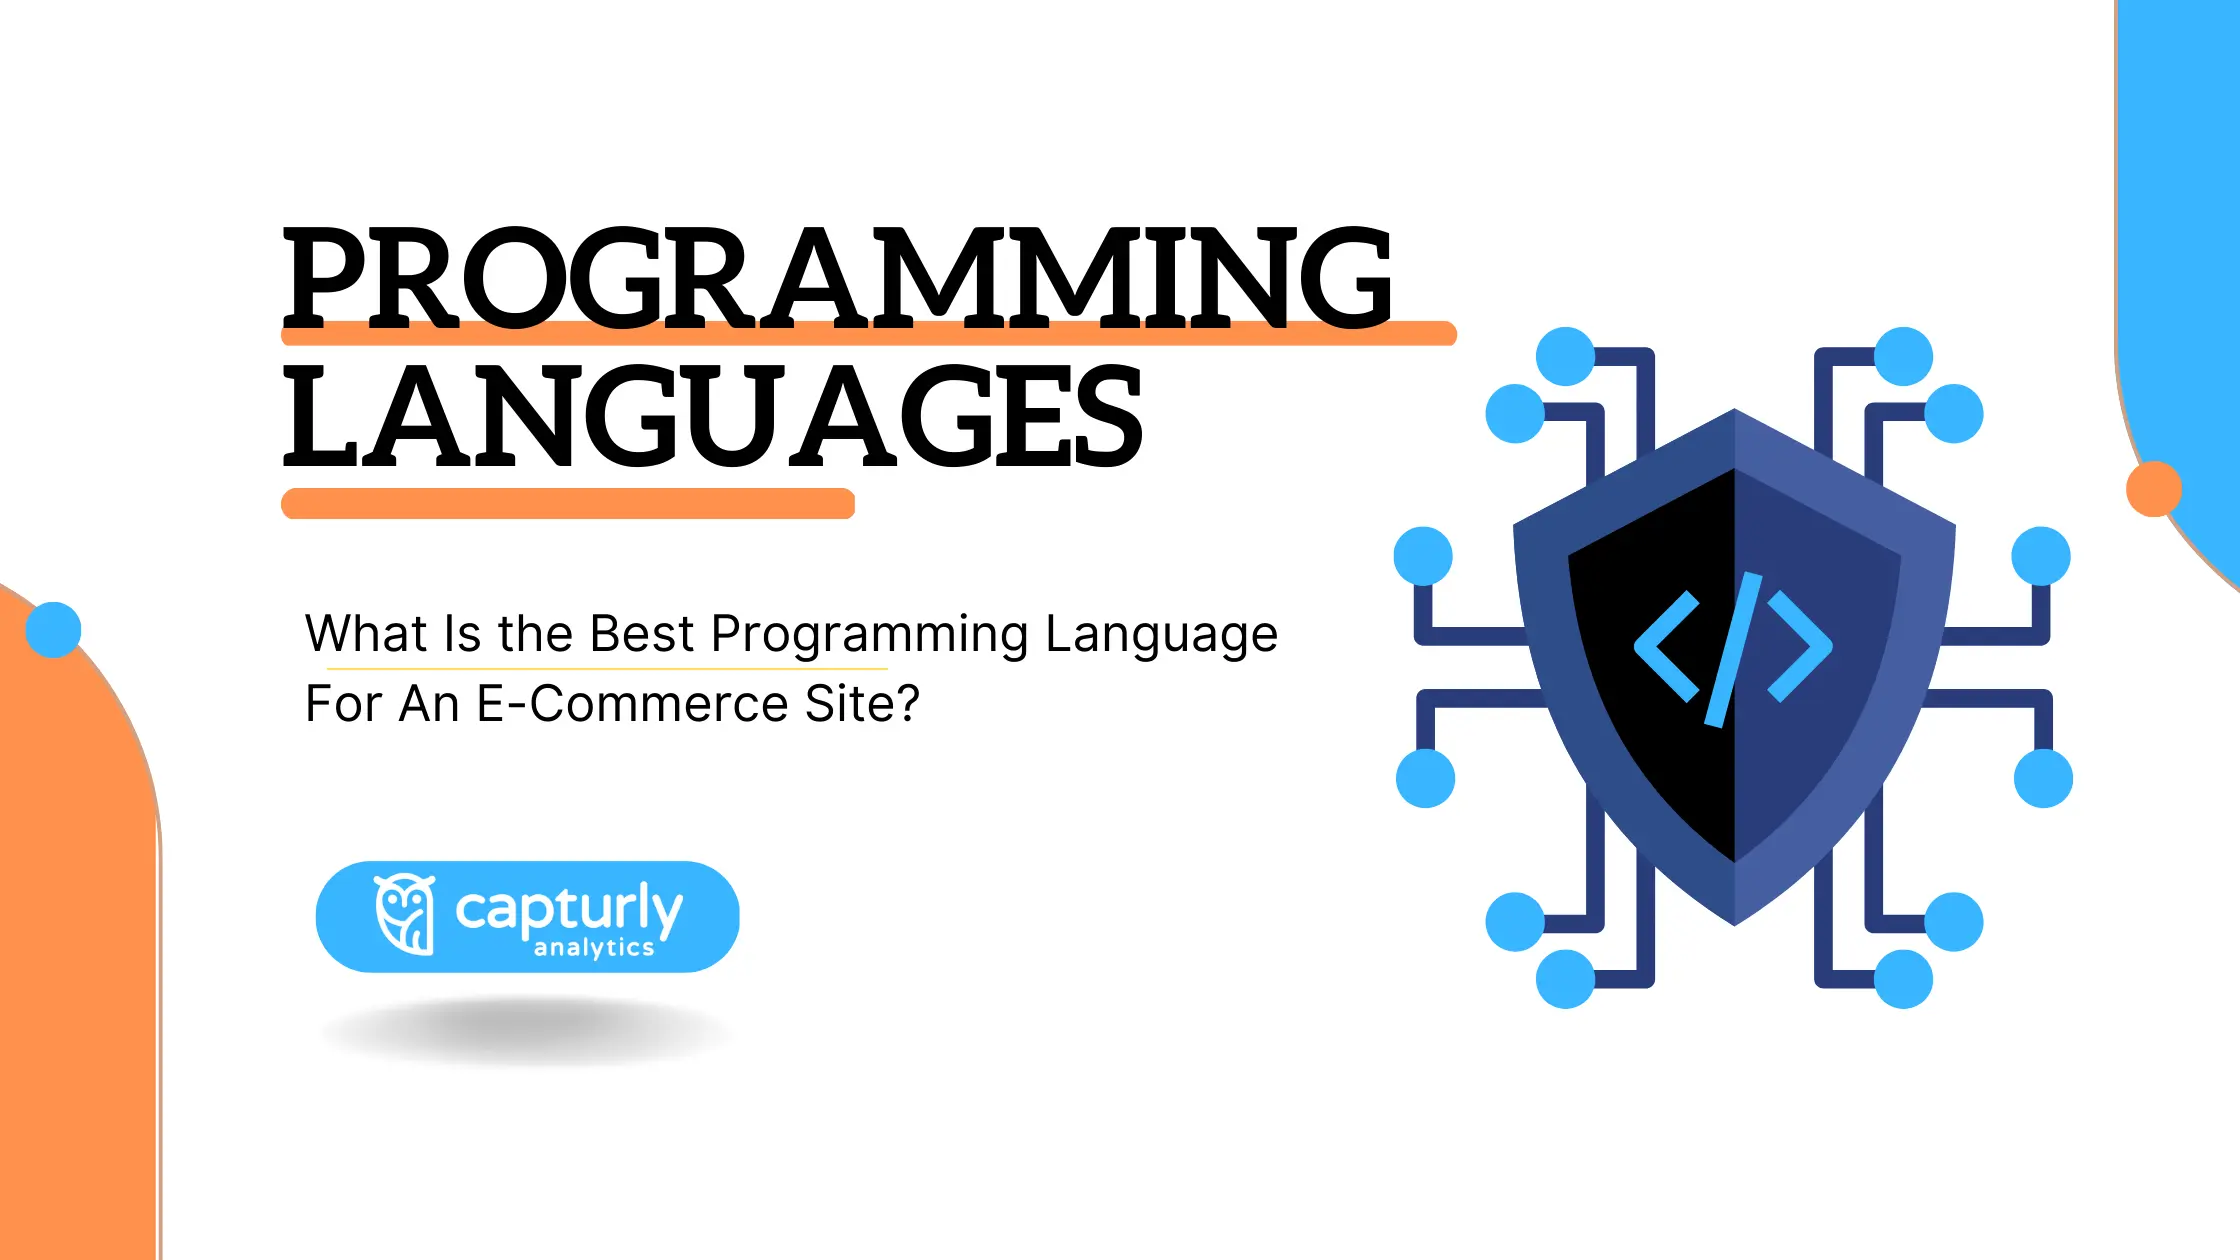 On the image there is the title: What is the best programming language for an e-commerce site? and a picture that illustrates a programming language.